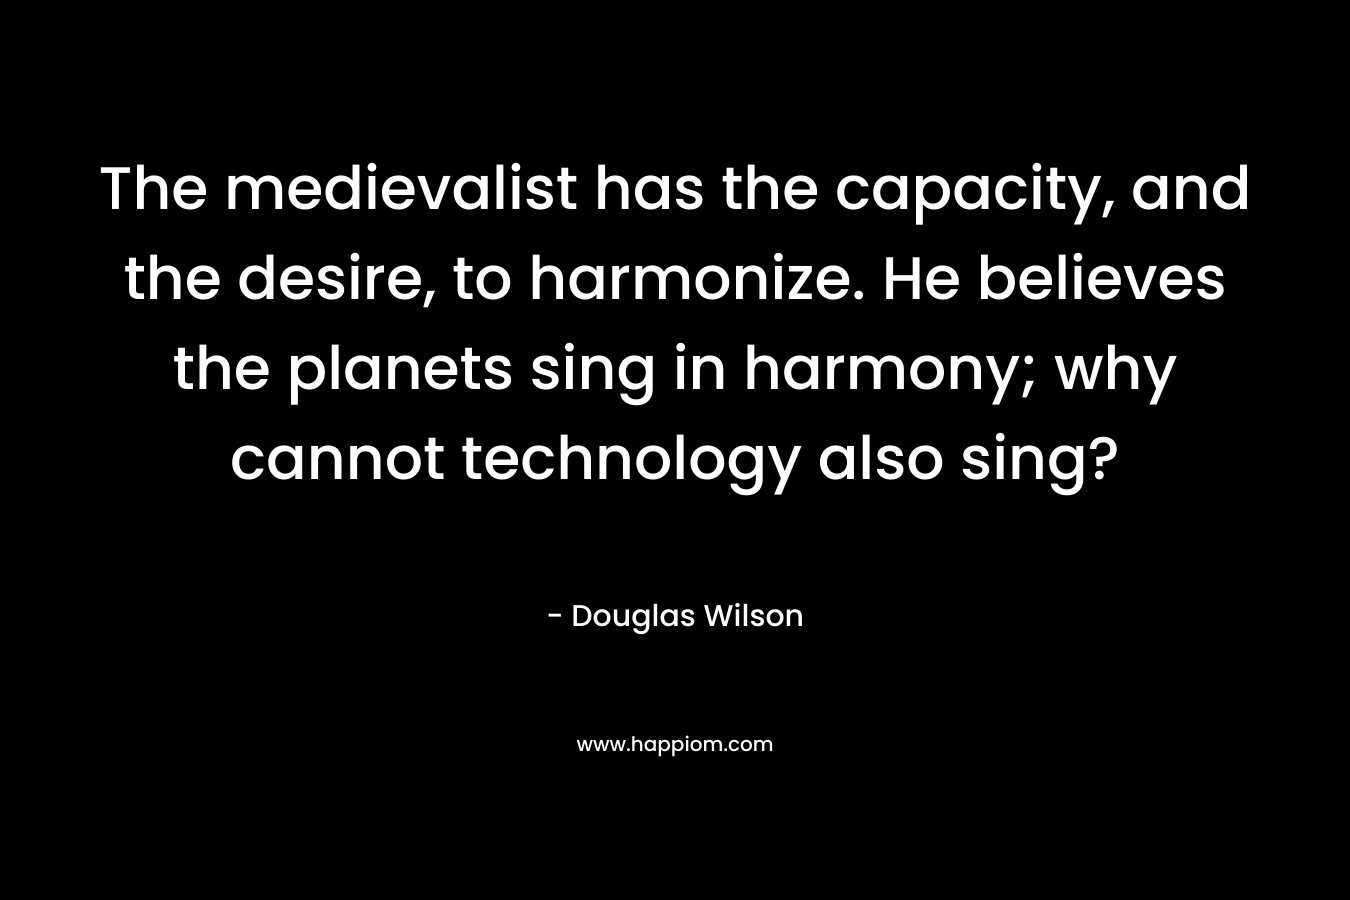 The medievalist has the capacity, and the desire, to harmonize. He believes the planets sing in harmony; why cannot technology also sing? – Douglas Wilson